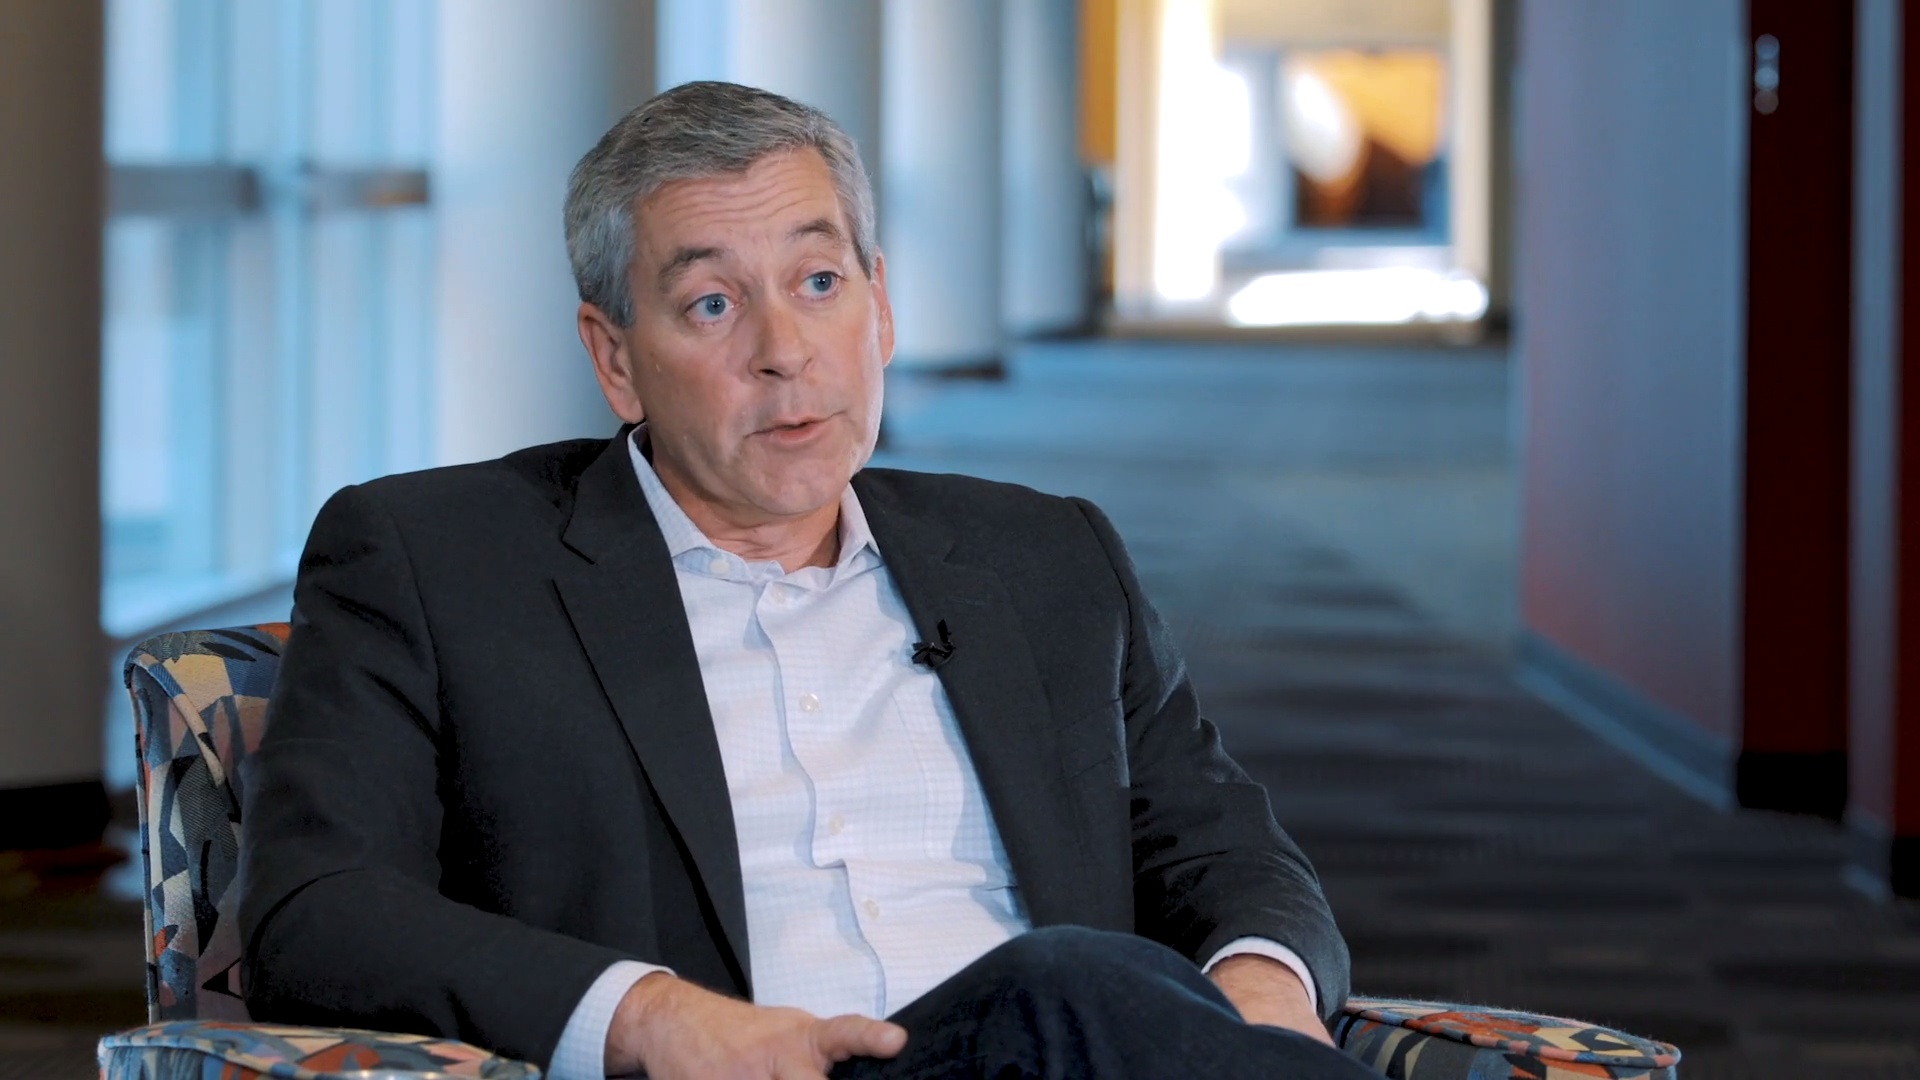 IBM Cloud GM Don Boulia on why IBM Cloud and Veeam are Better Together